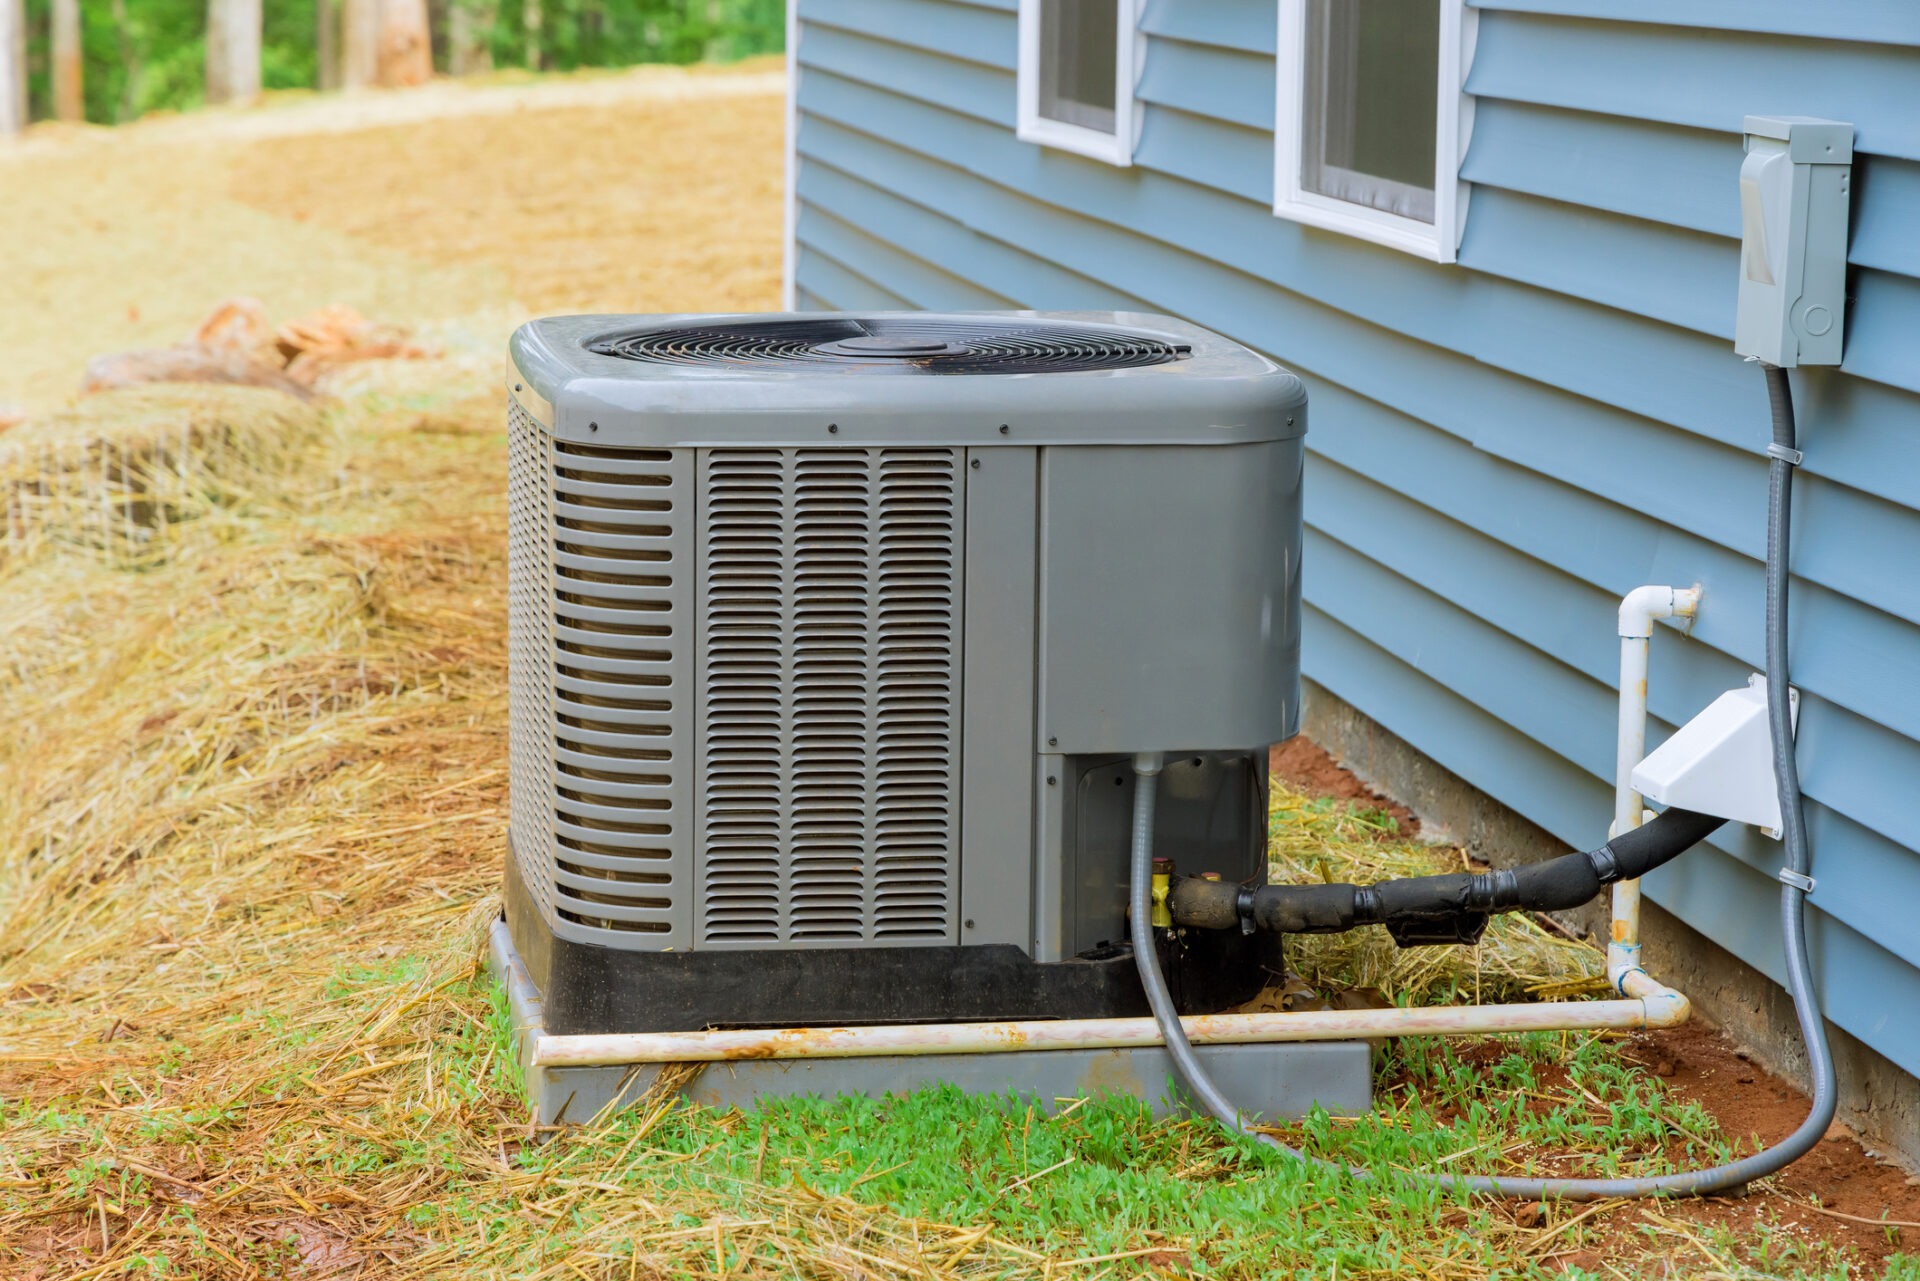 An outdoor central air conditioning unit positioned next to a blue-sided house with visible electrical and refrigerant lines on a grassy base.